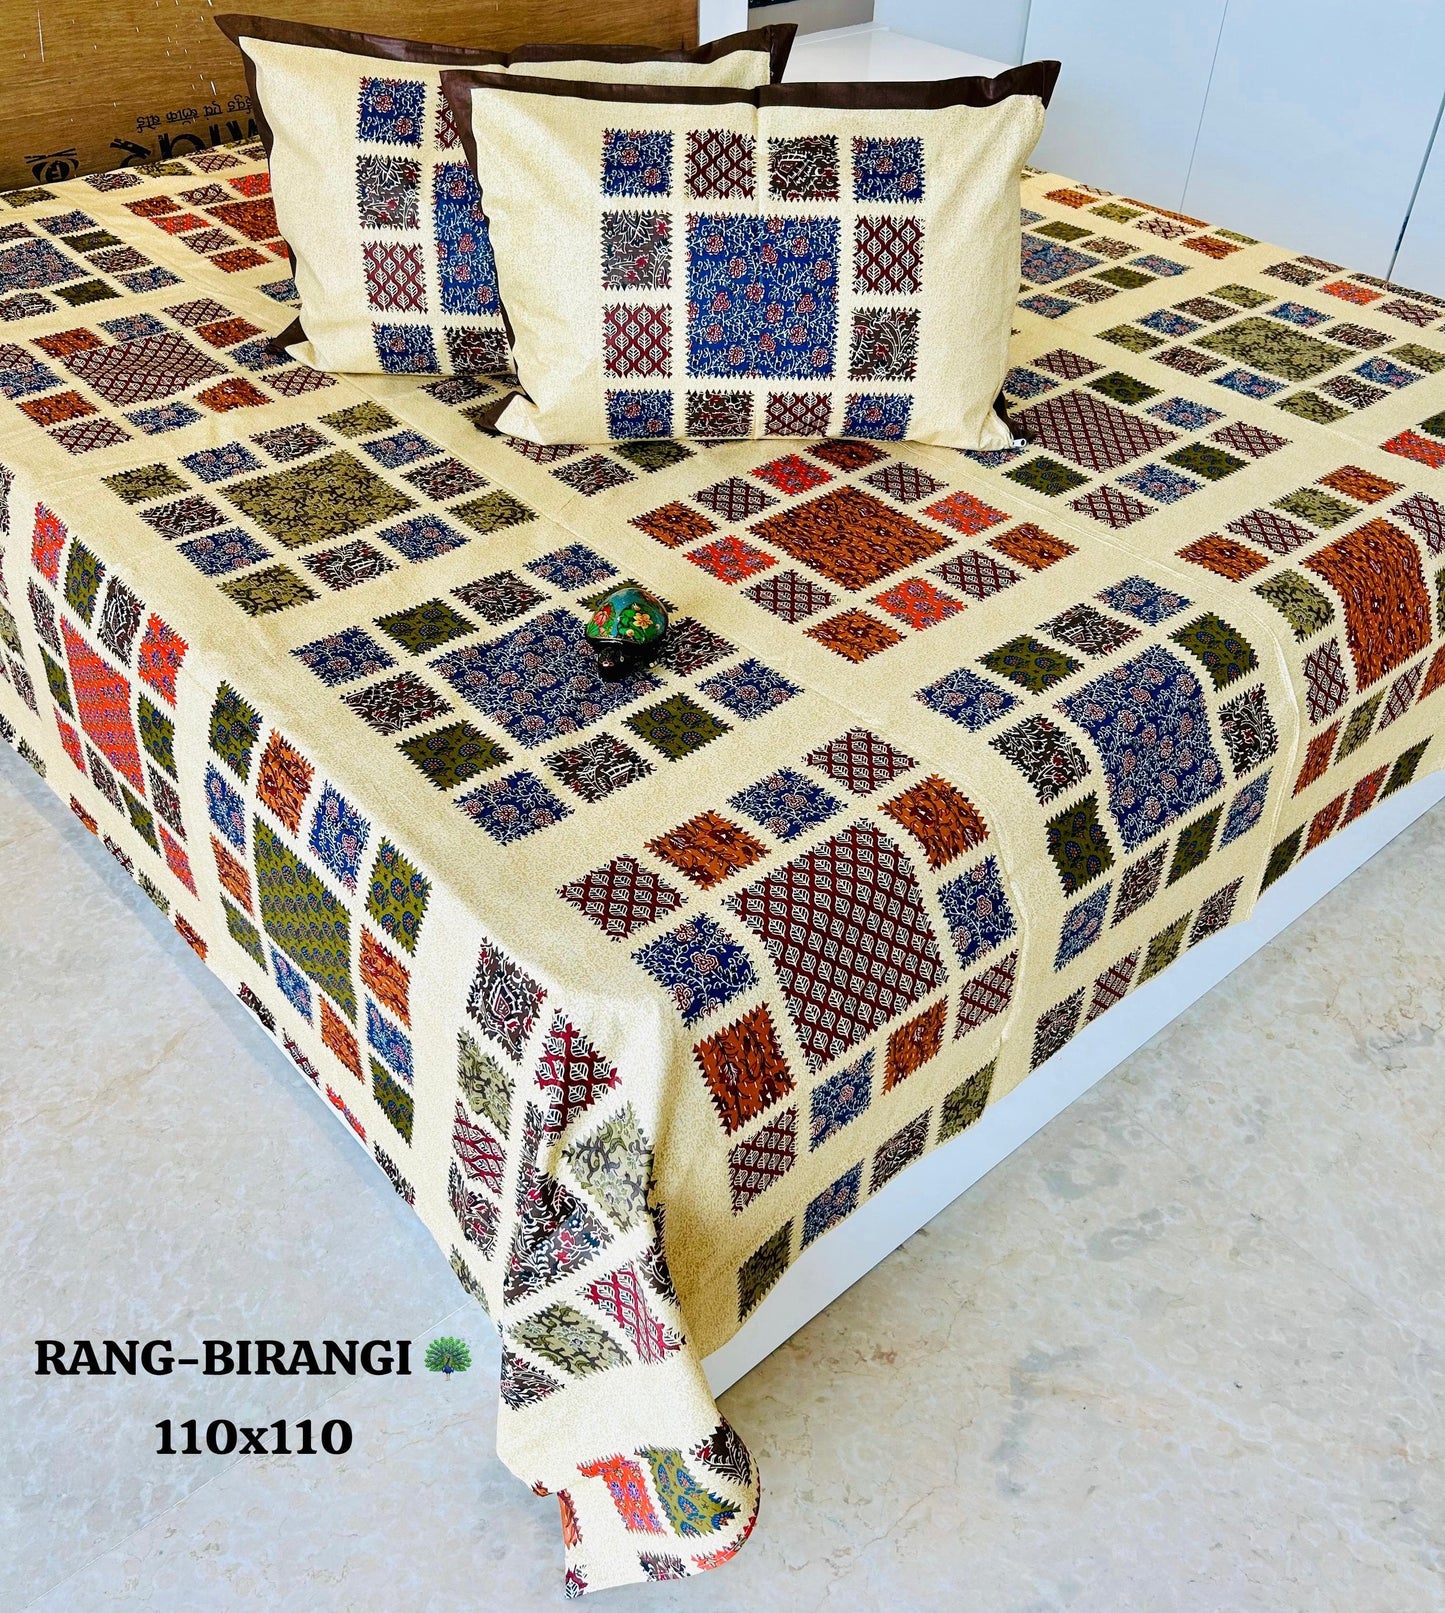 Blocks Thin Printed Bedspread Bedcover (Super King 110x110 inches)